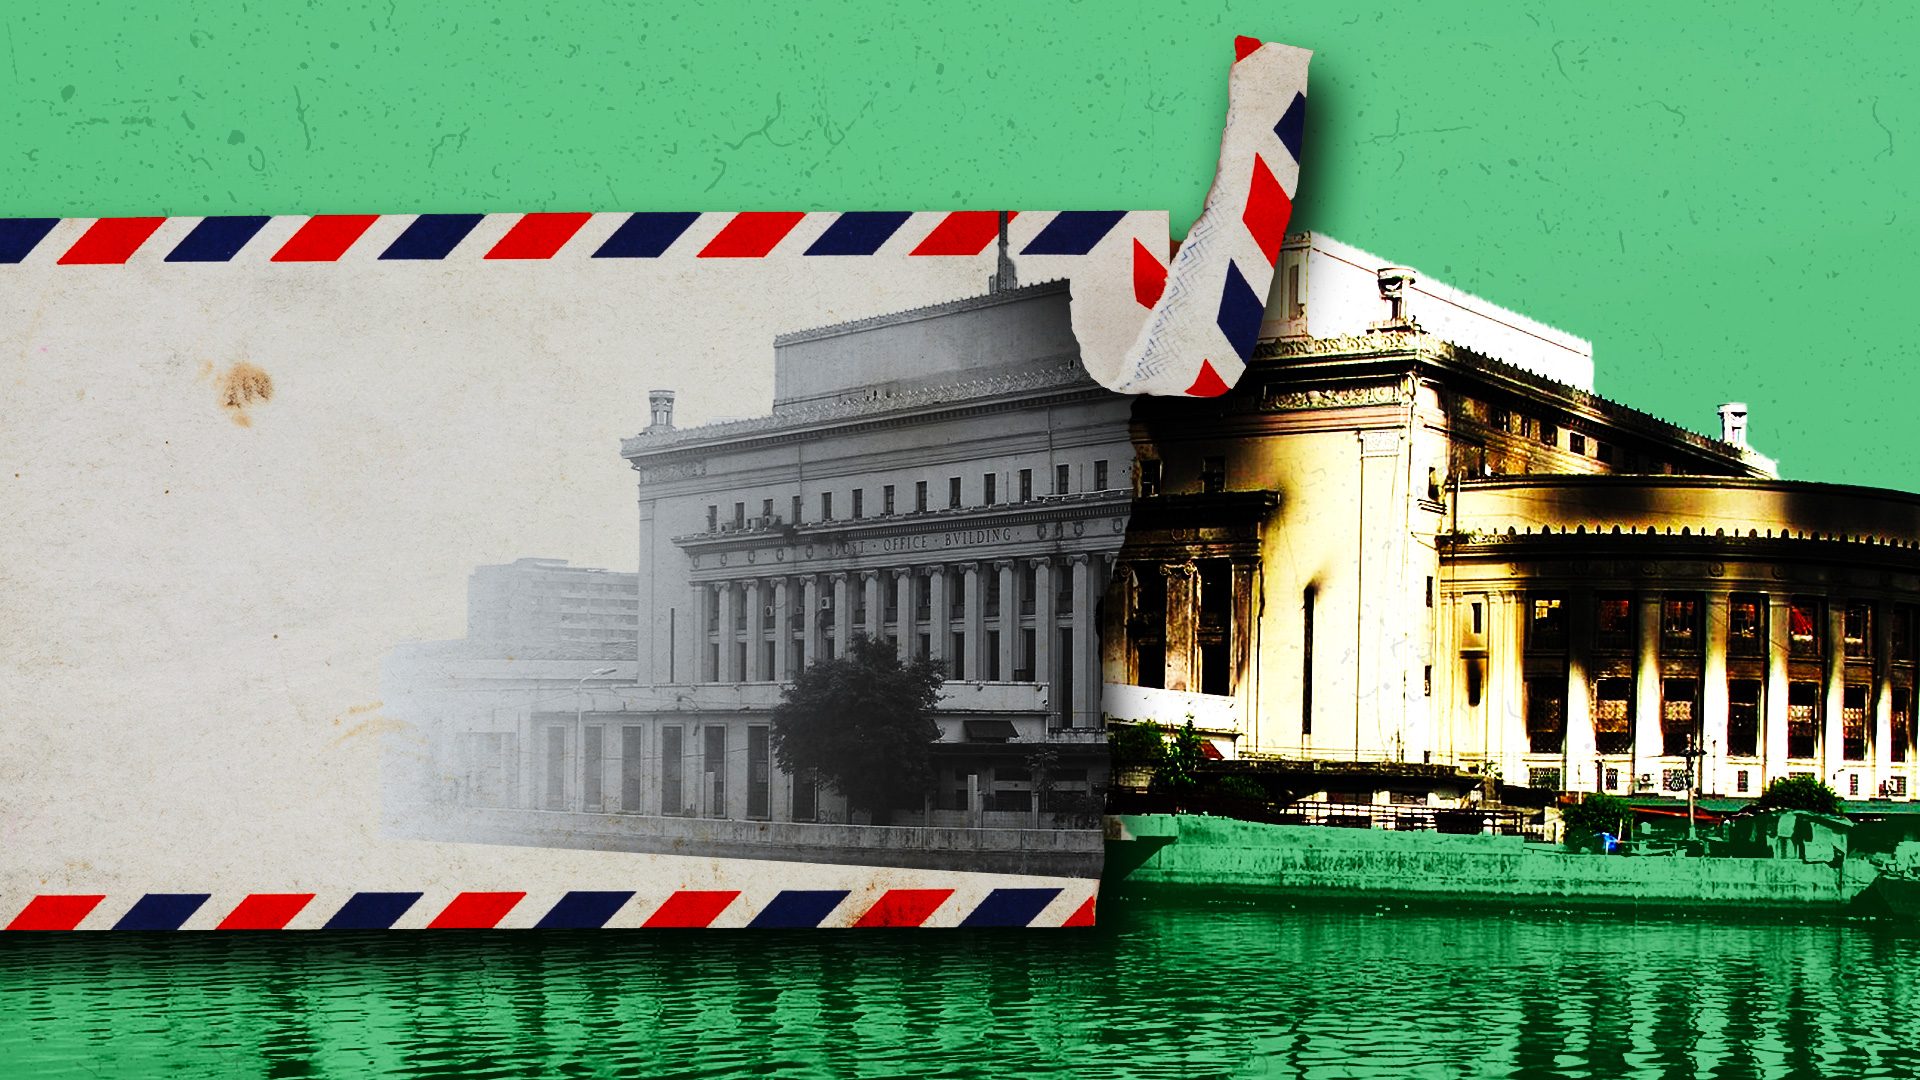 [OPINION] The Manila Central Post Office will shed its old, burnt skin and become new again